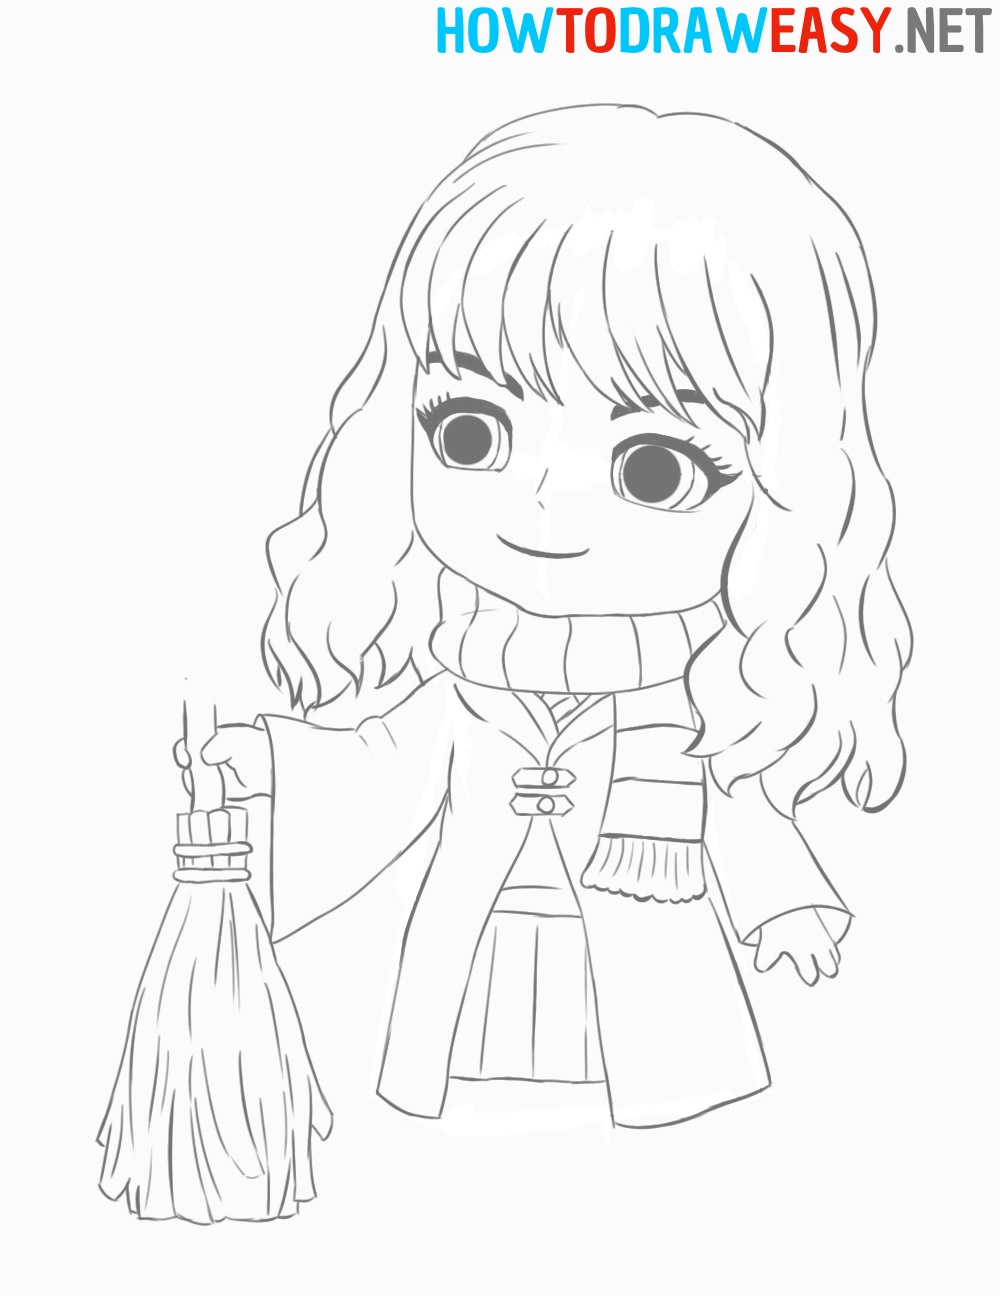 How to Sketch Hermione Granger